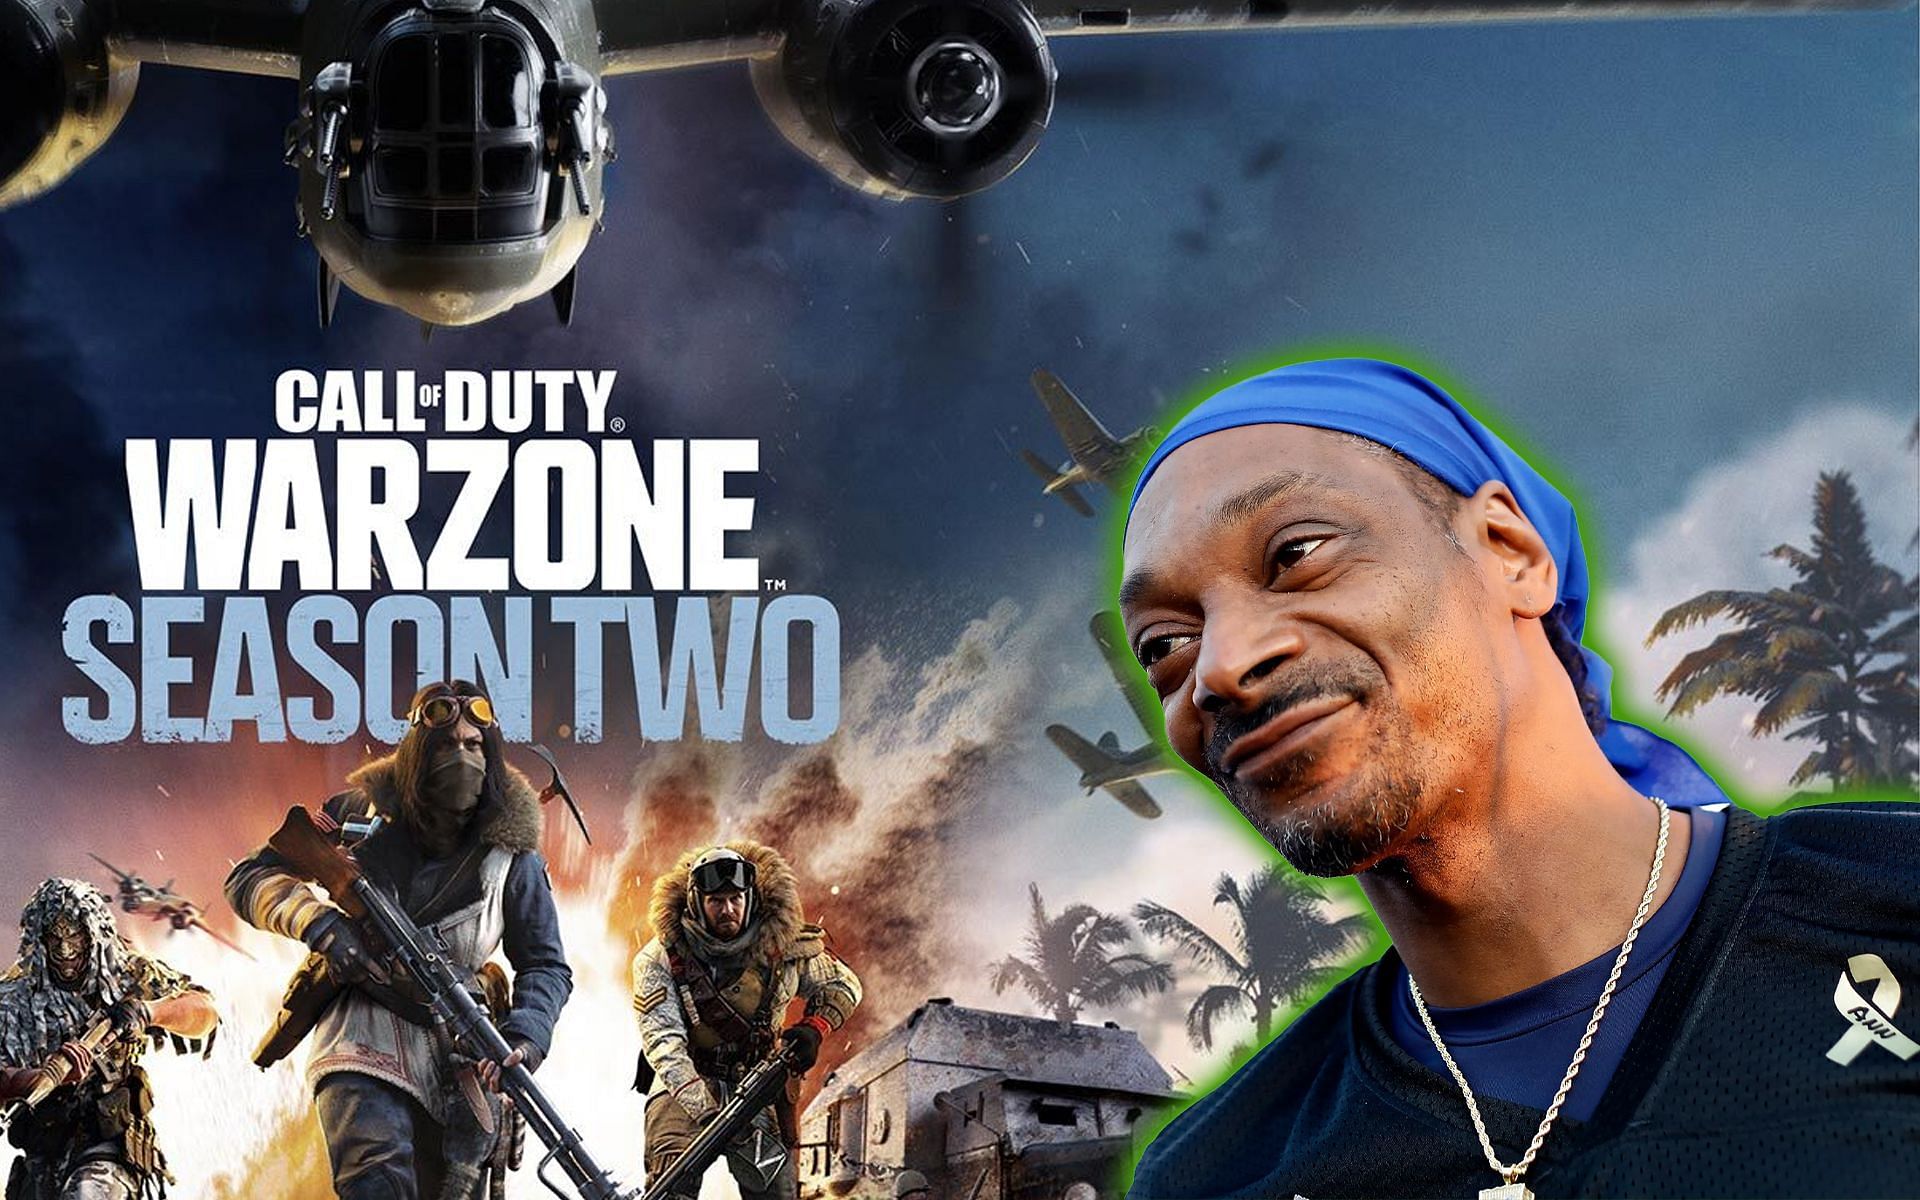 Snoop Dogg collaboration might be coming to COD: Warzone and Vanguard next month. (Image by Sportskeeda/Asset via Activision)